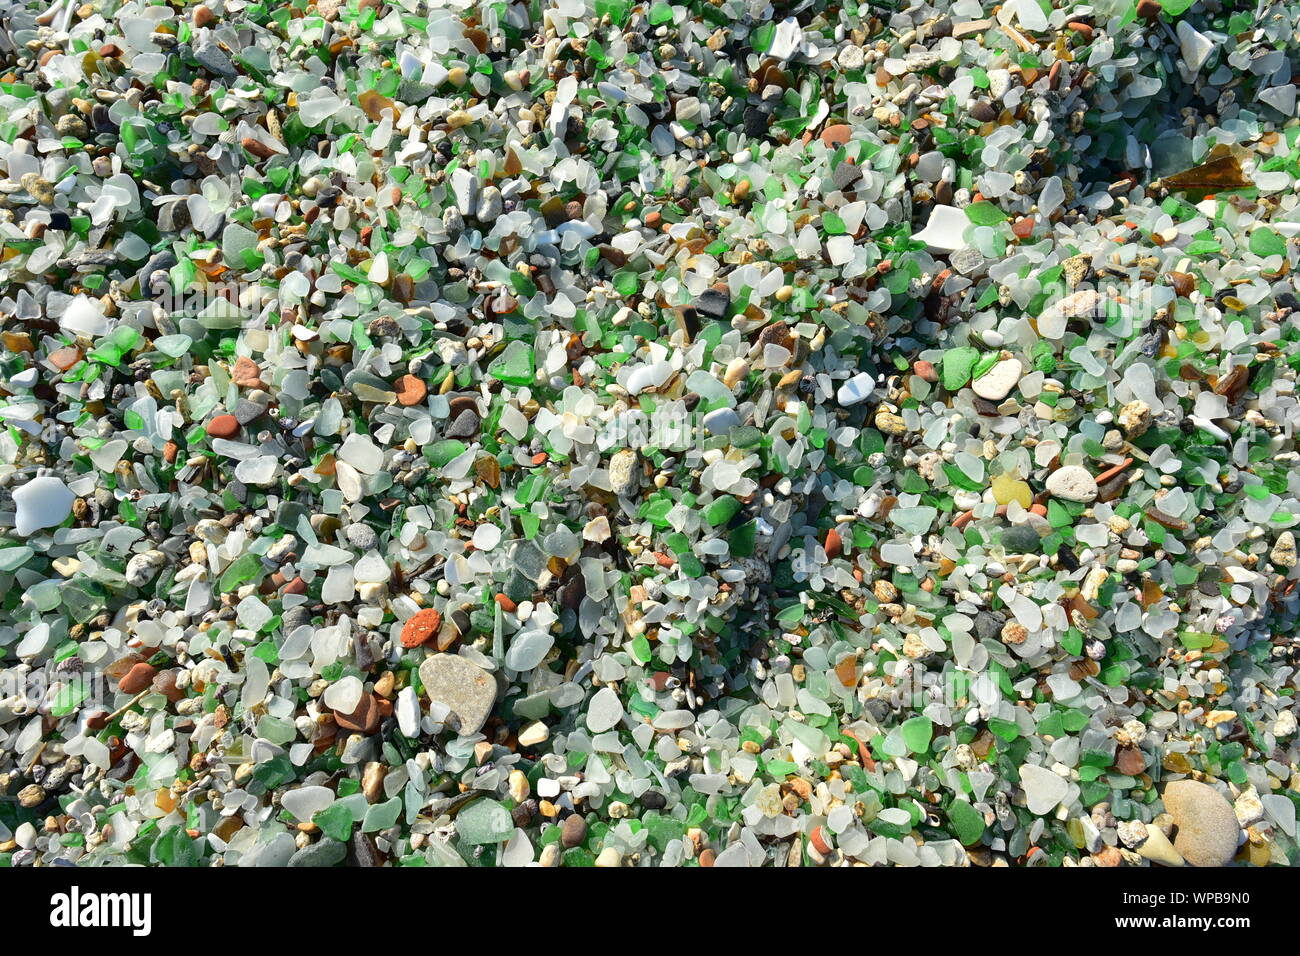 millions of eroded glass cullets on beach Stock Photo